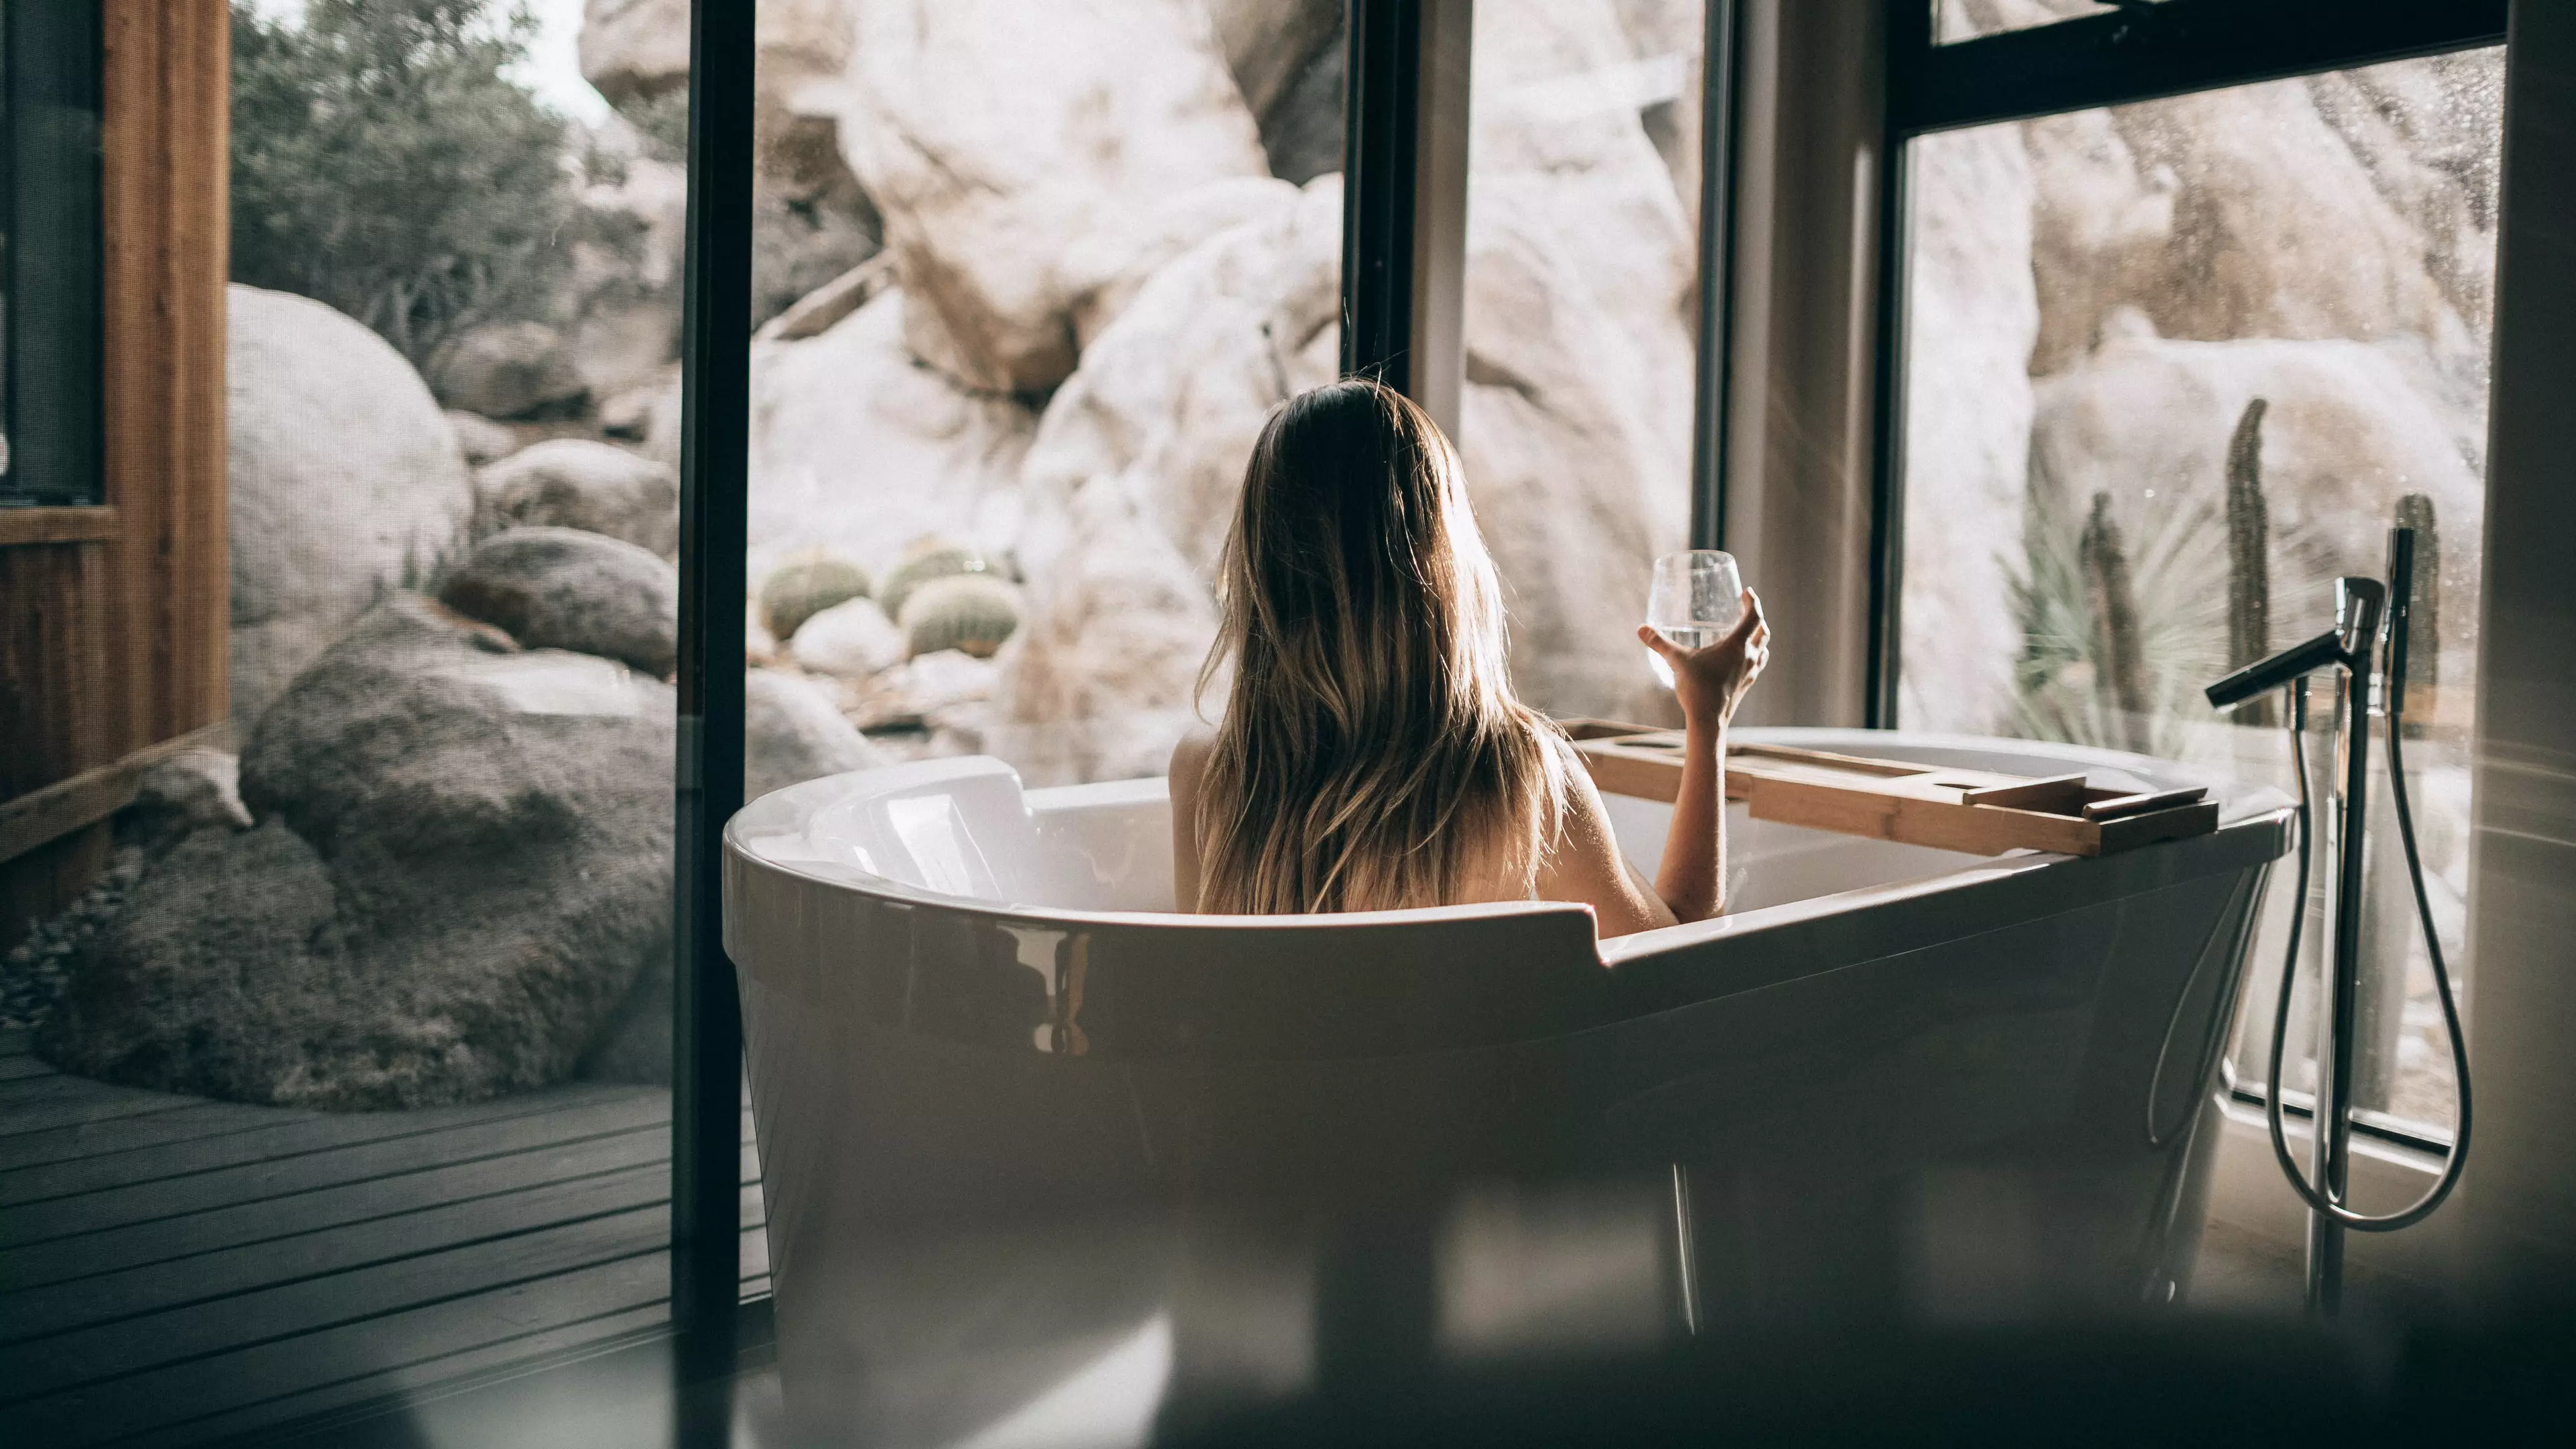  A Long Bath Is Just As Good For You As A Workout According To Science